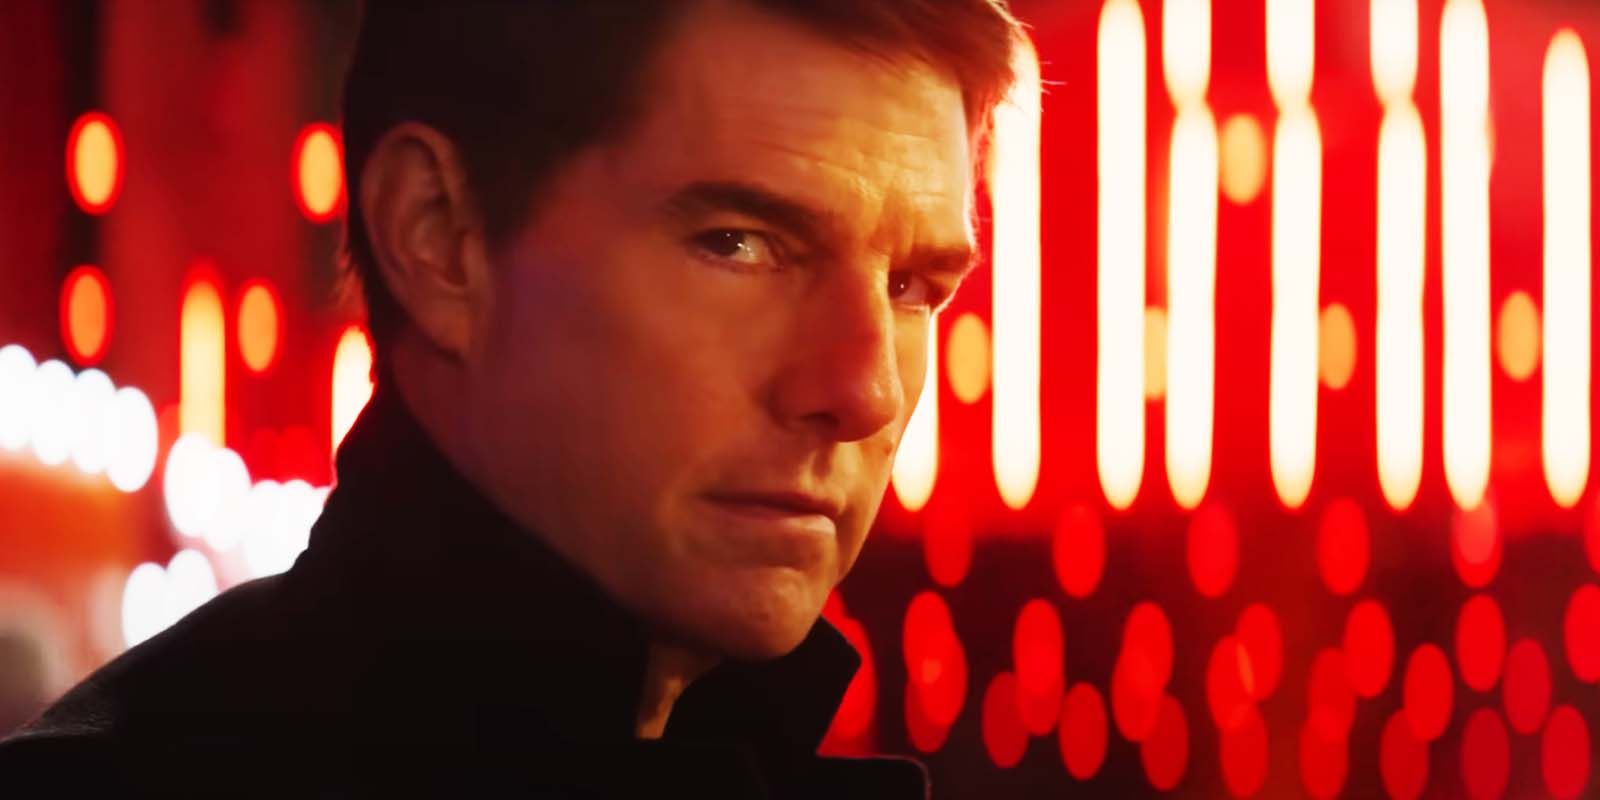 Tom Cruise as Ethan Hunt in Mission: Impossible 7